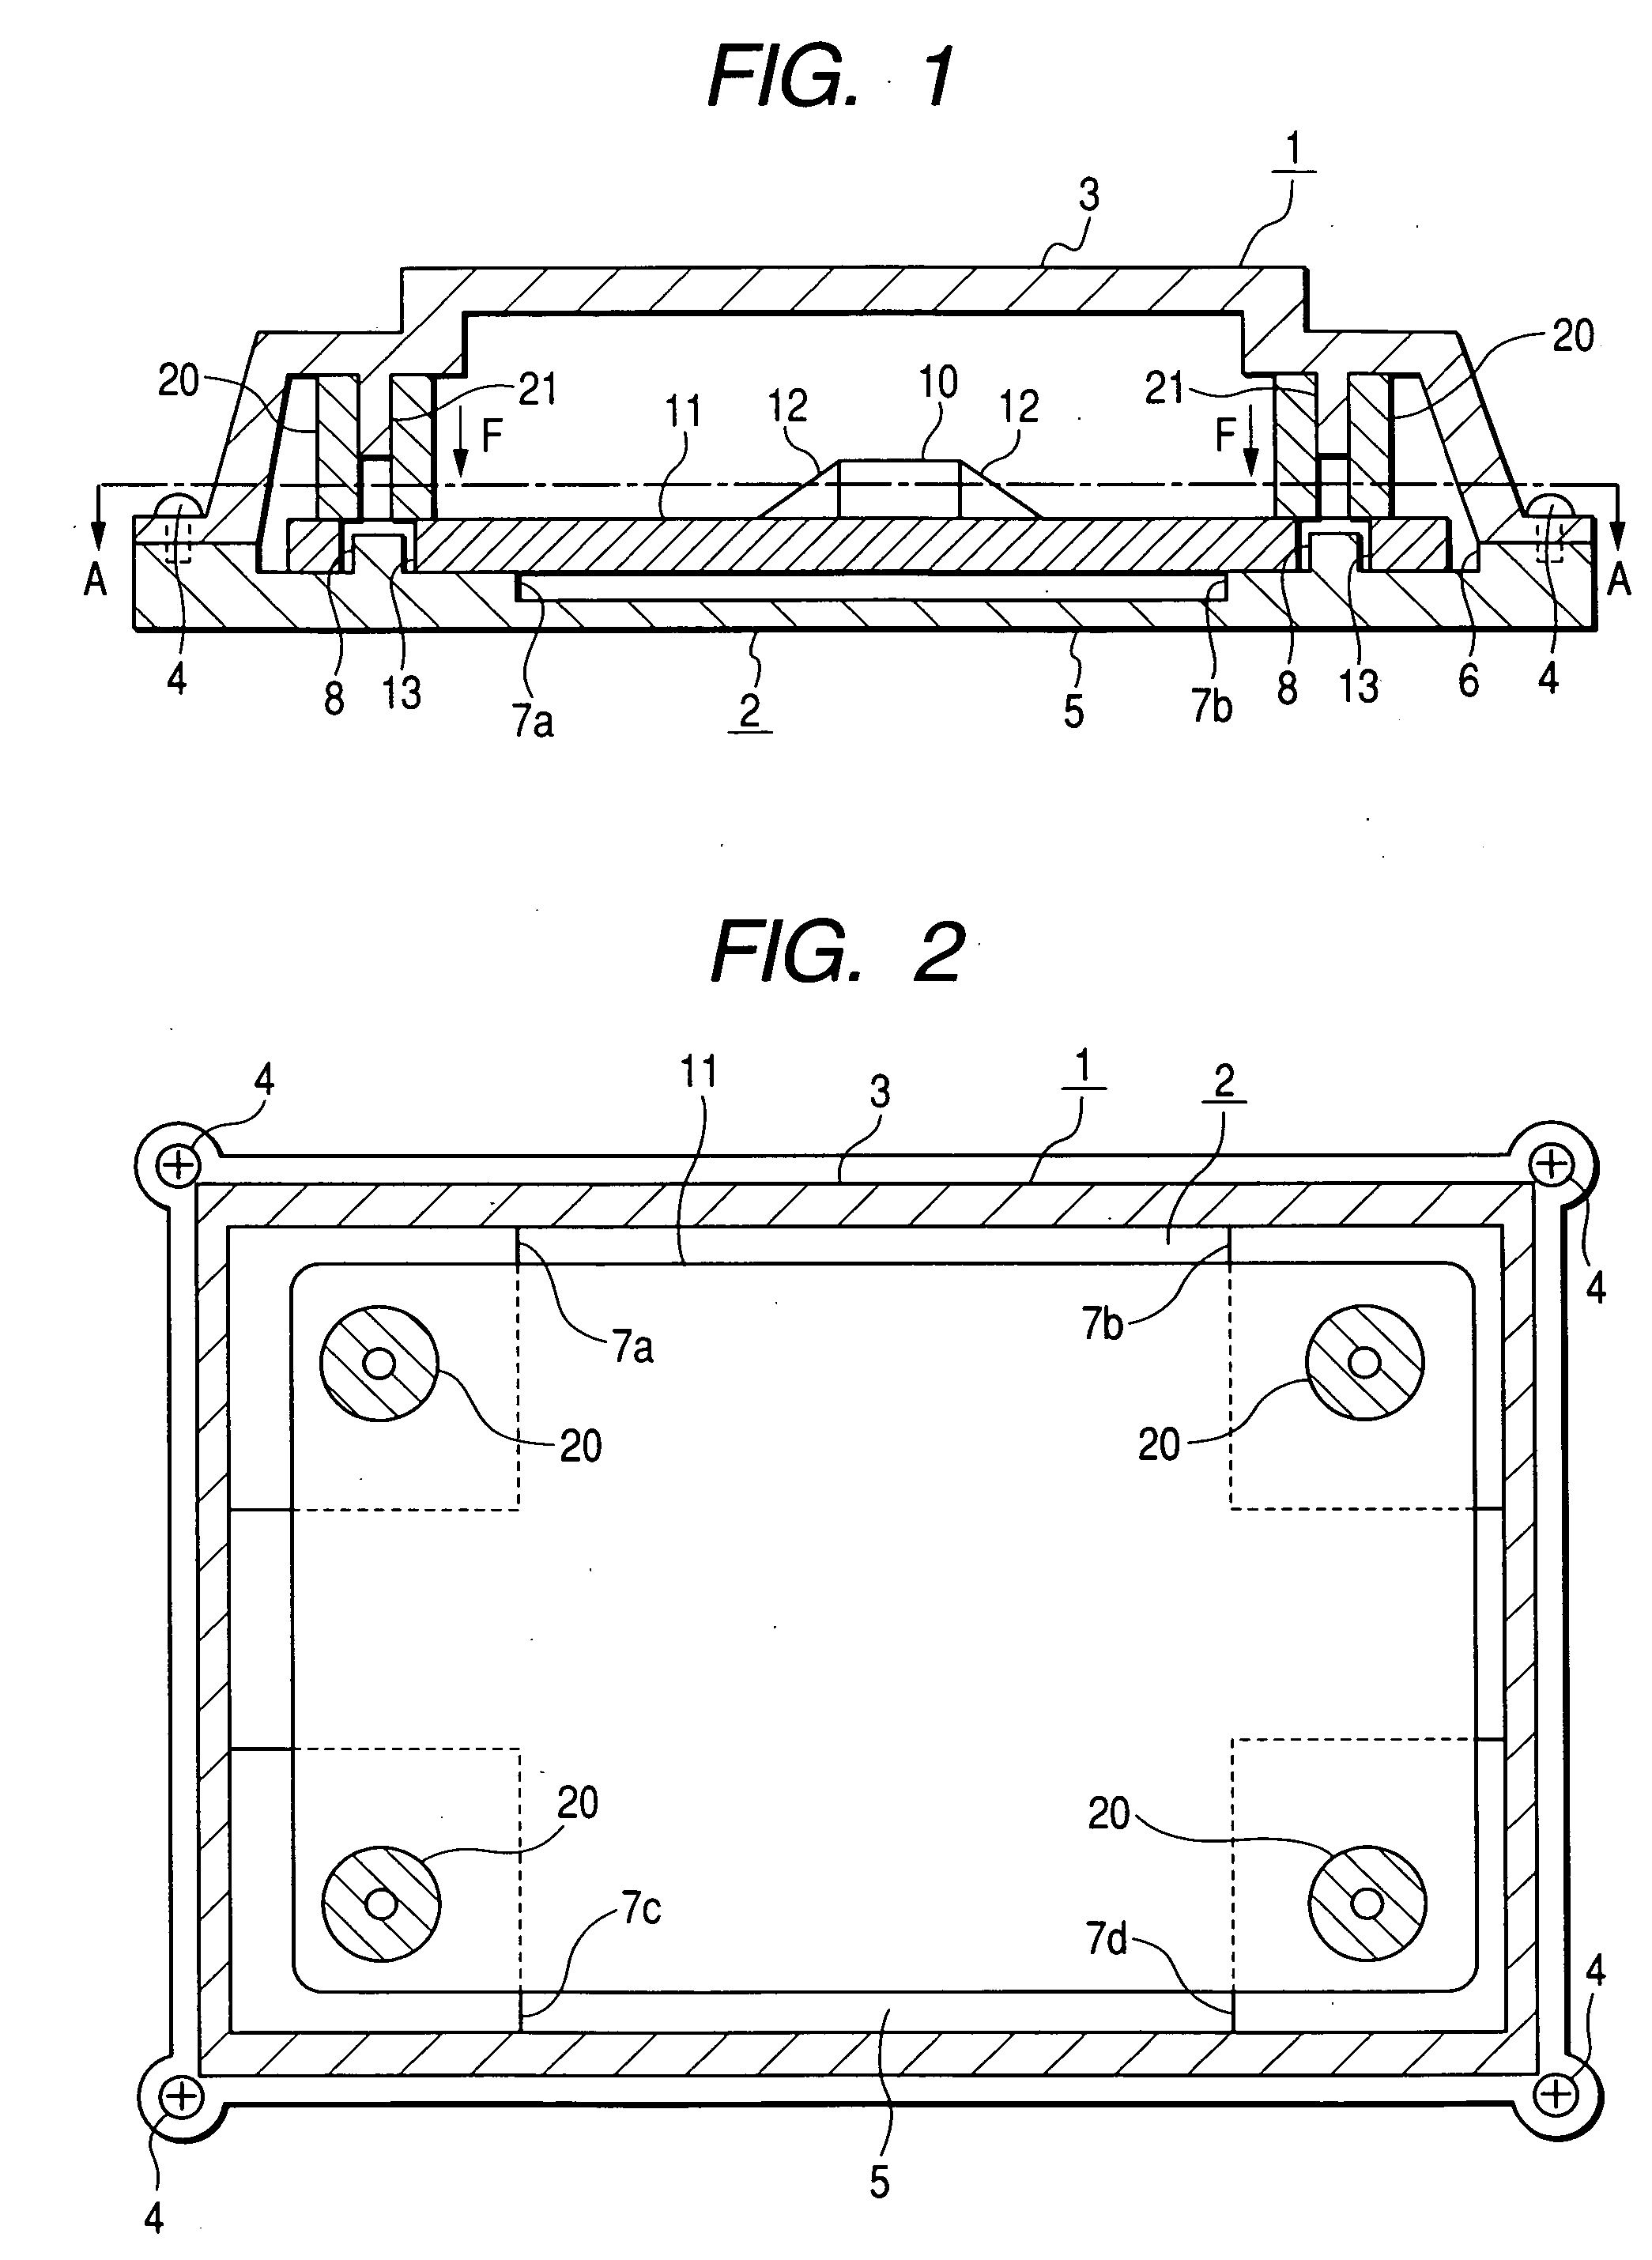 Electronic apparatus including circuit board chassis